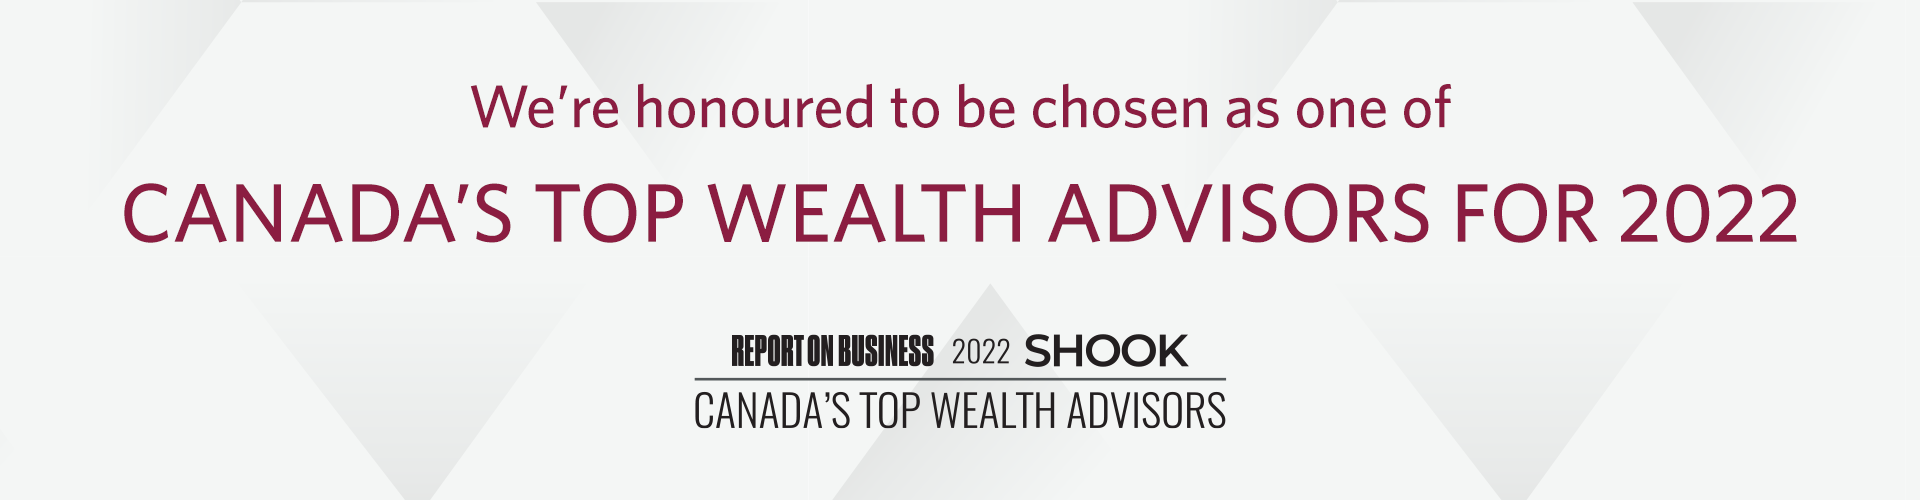 We’re honoured to be chosen as one of Canada’s Top Wealth Advisor for 2022 by The Globe and Mail and SHOOK Research ranking.